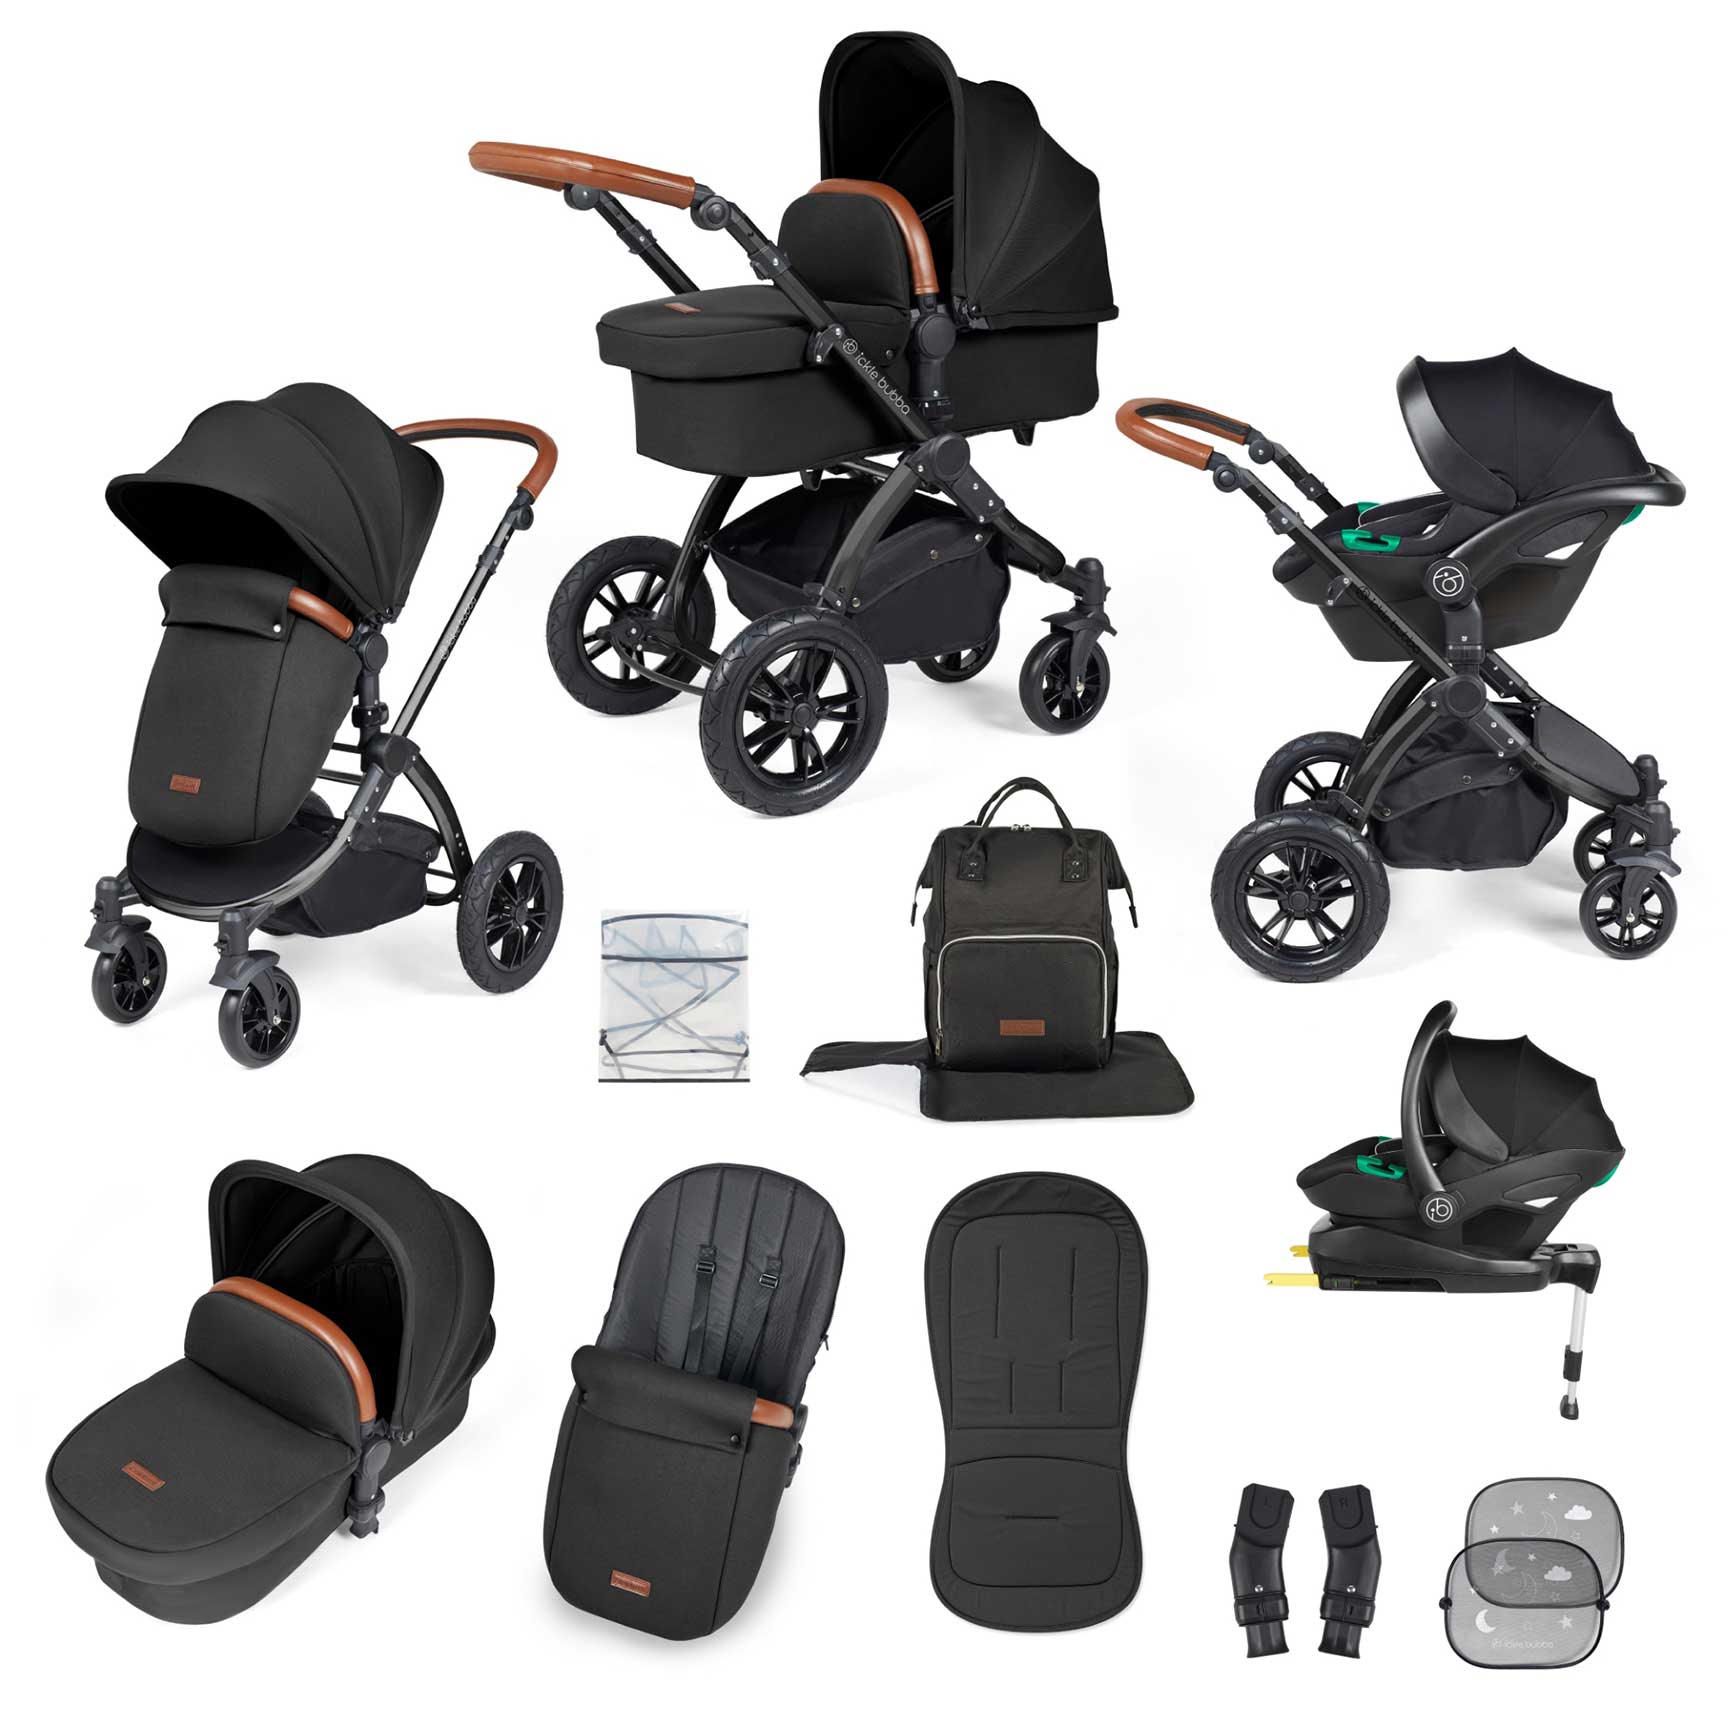 Ickle Bubba travel systems Ickle Bubba Stomp Luxe All-in-One Travel System with Isofix Base - Black/Midnight/Tan 10-011-300-203